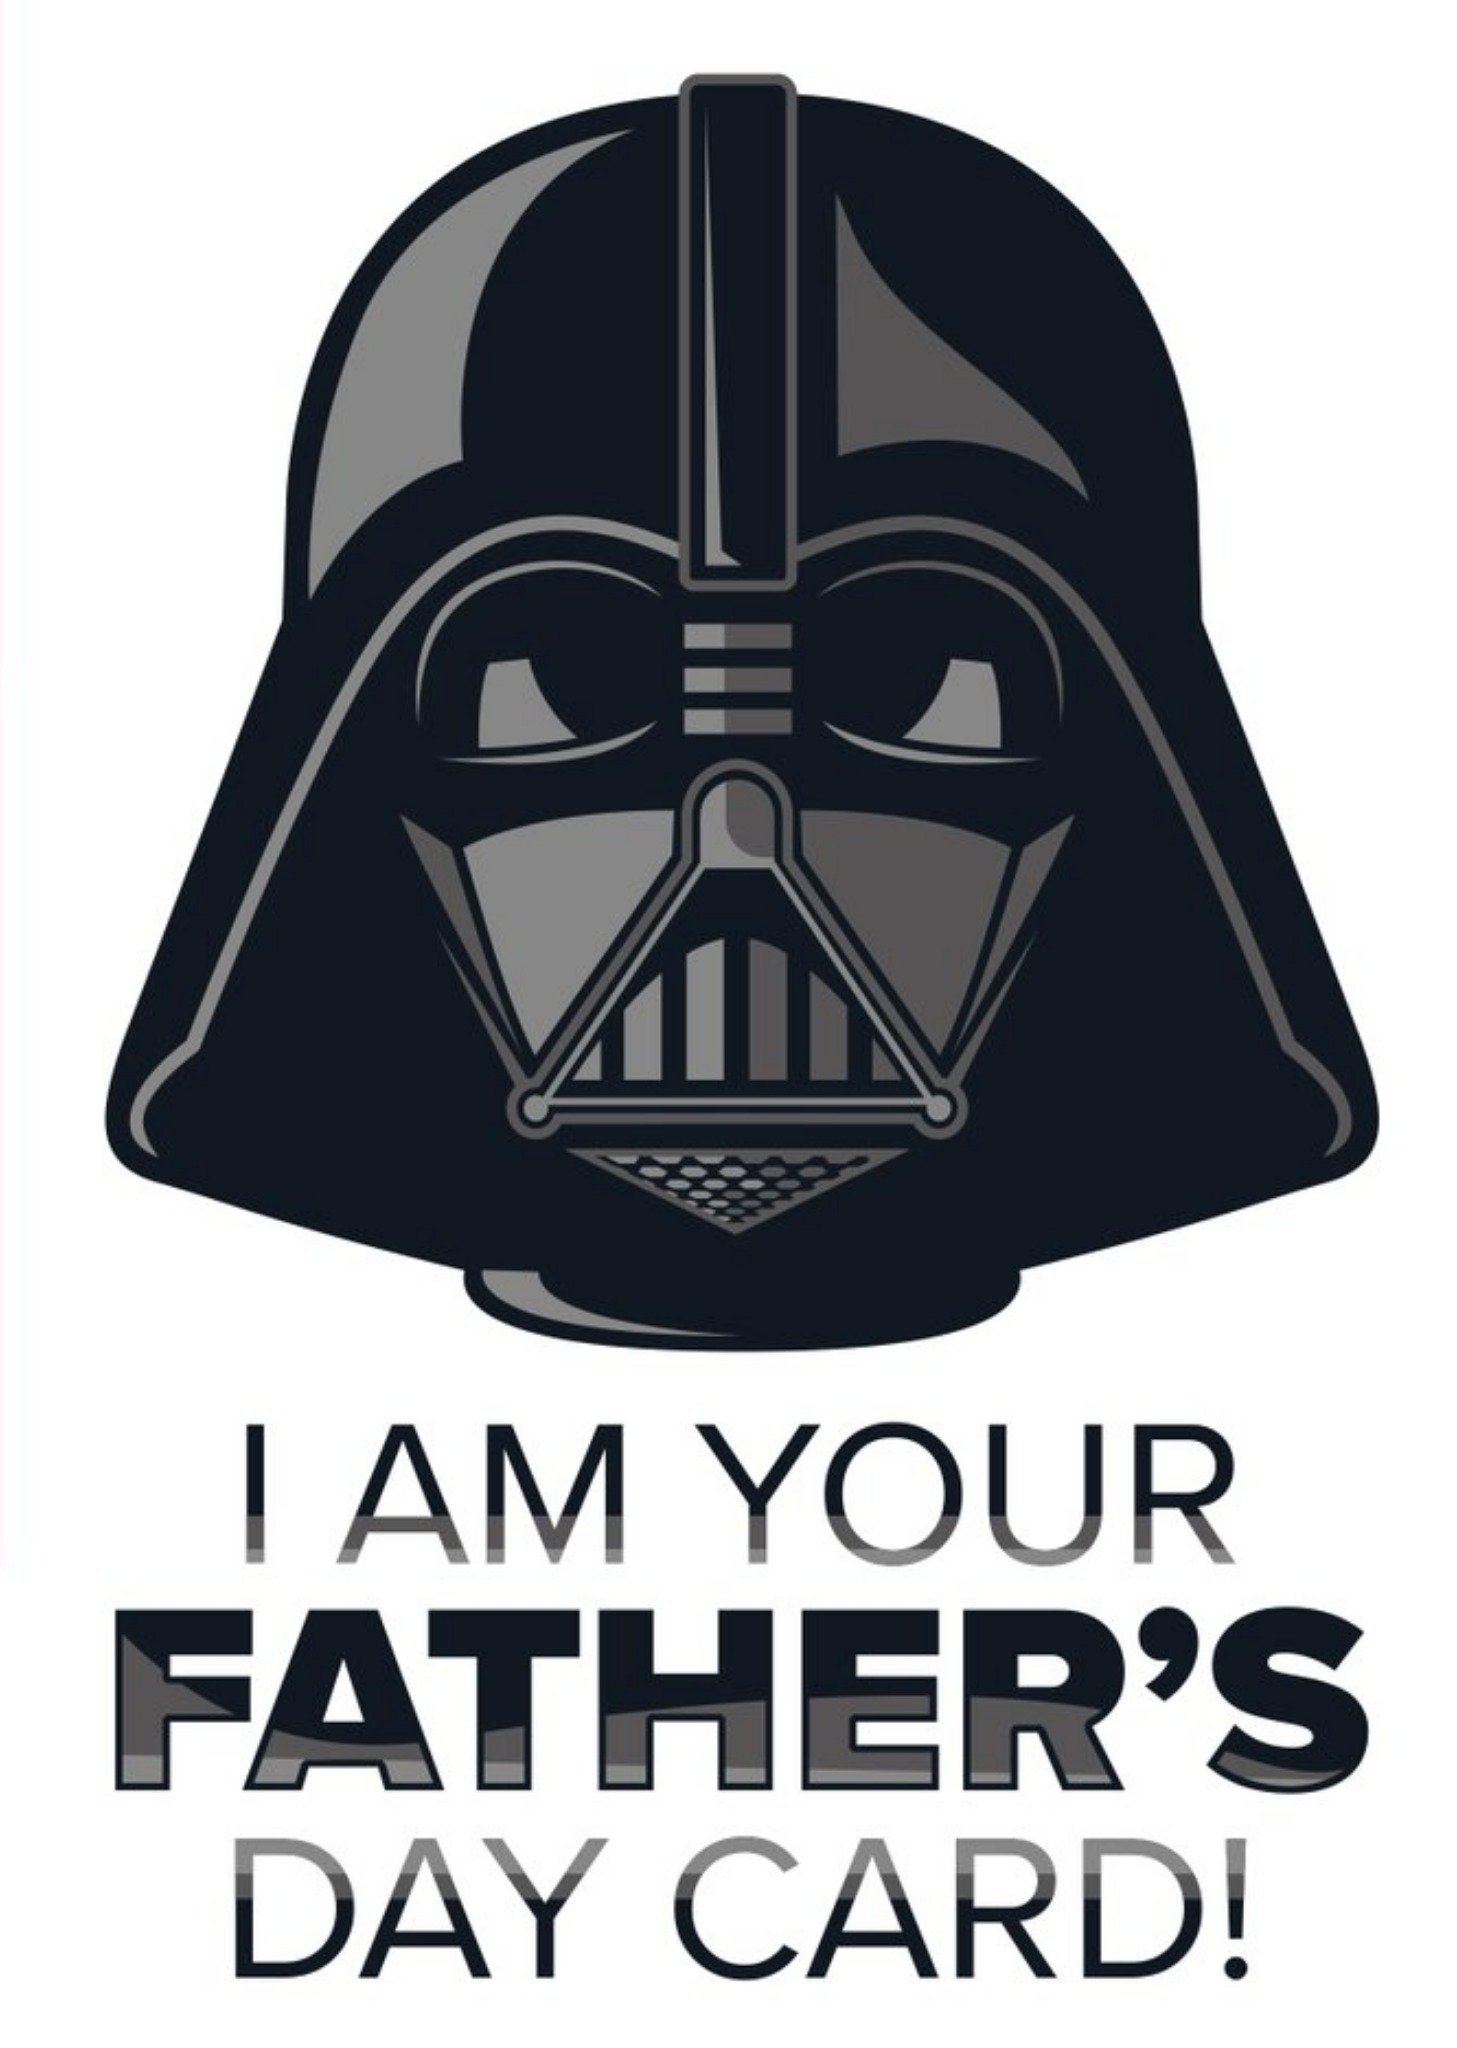 Disney Star Wars Darth Vader I Am Your Father's Day Card, Large